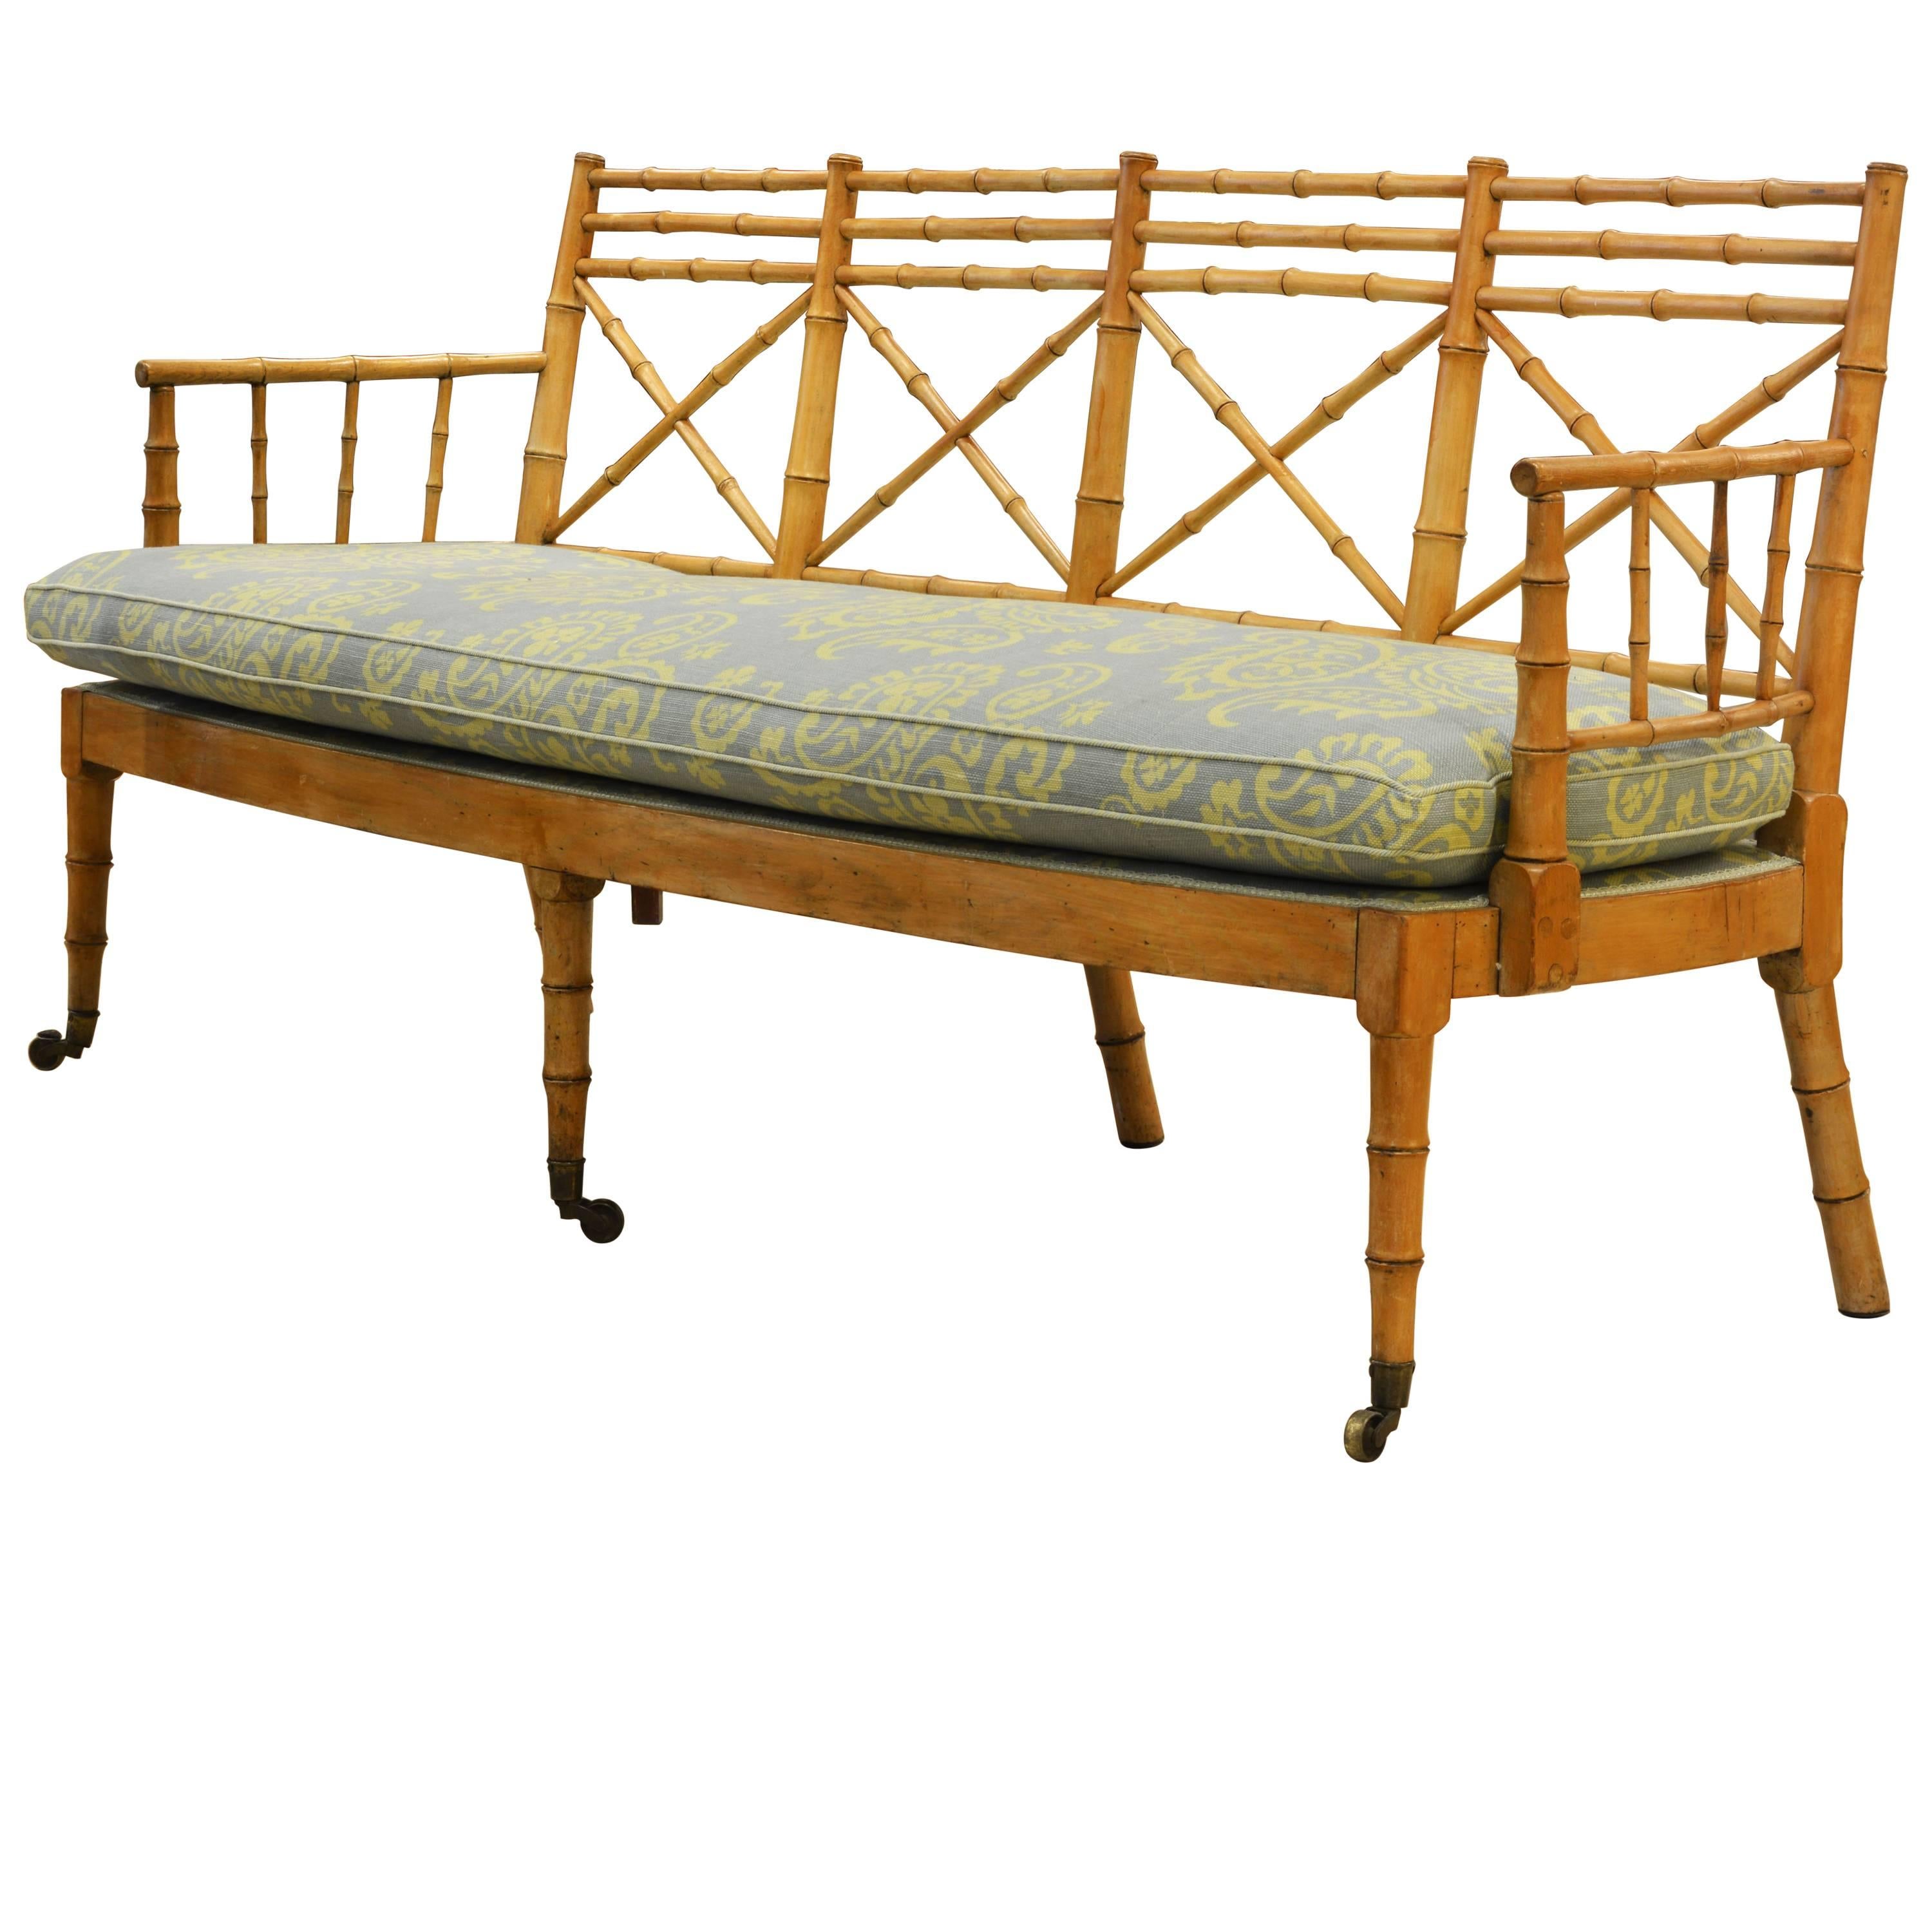 Fine English Regency Period Faux Bamboo Settee or Bench with Upholstered Seat